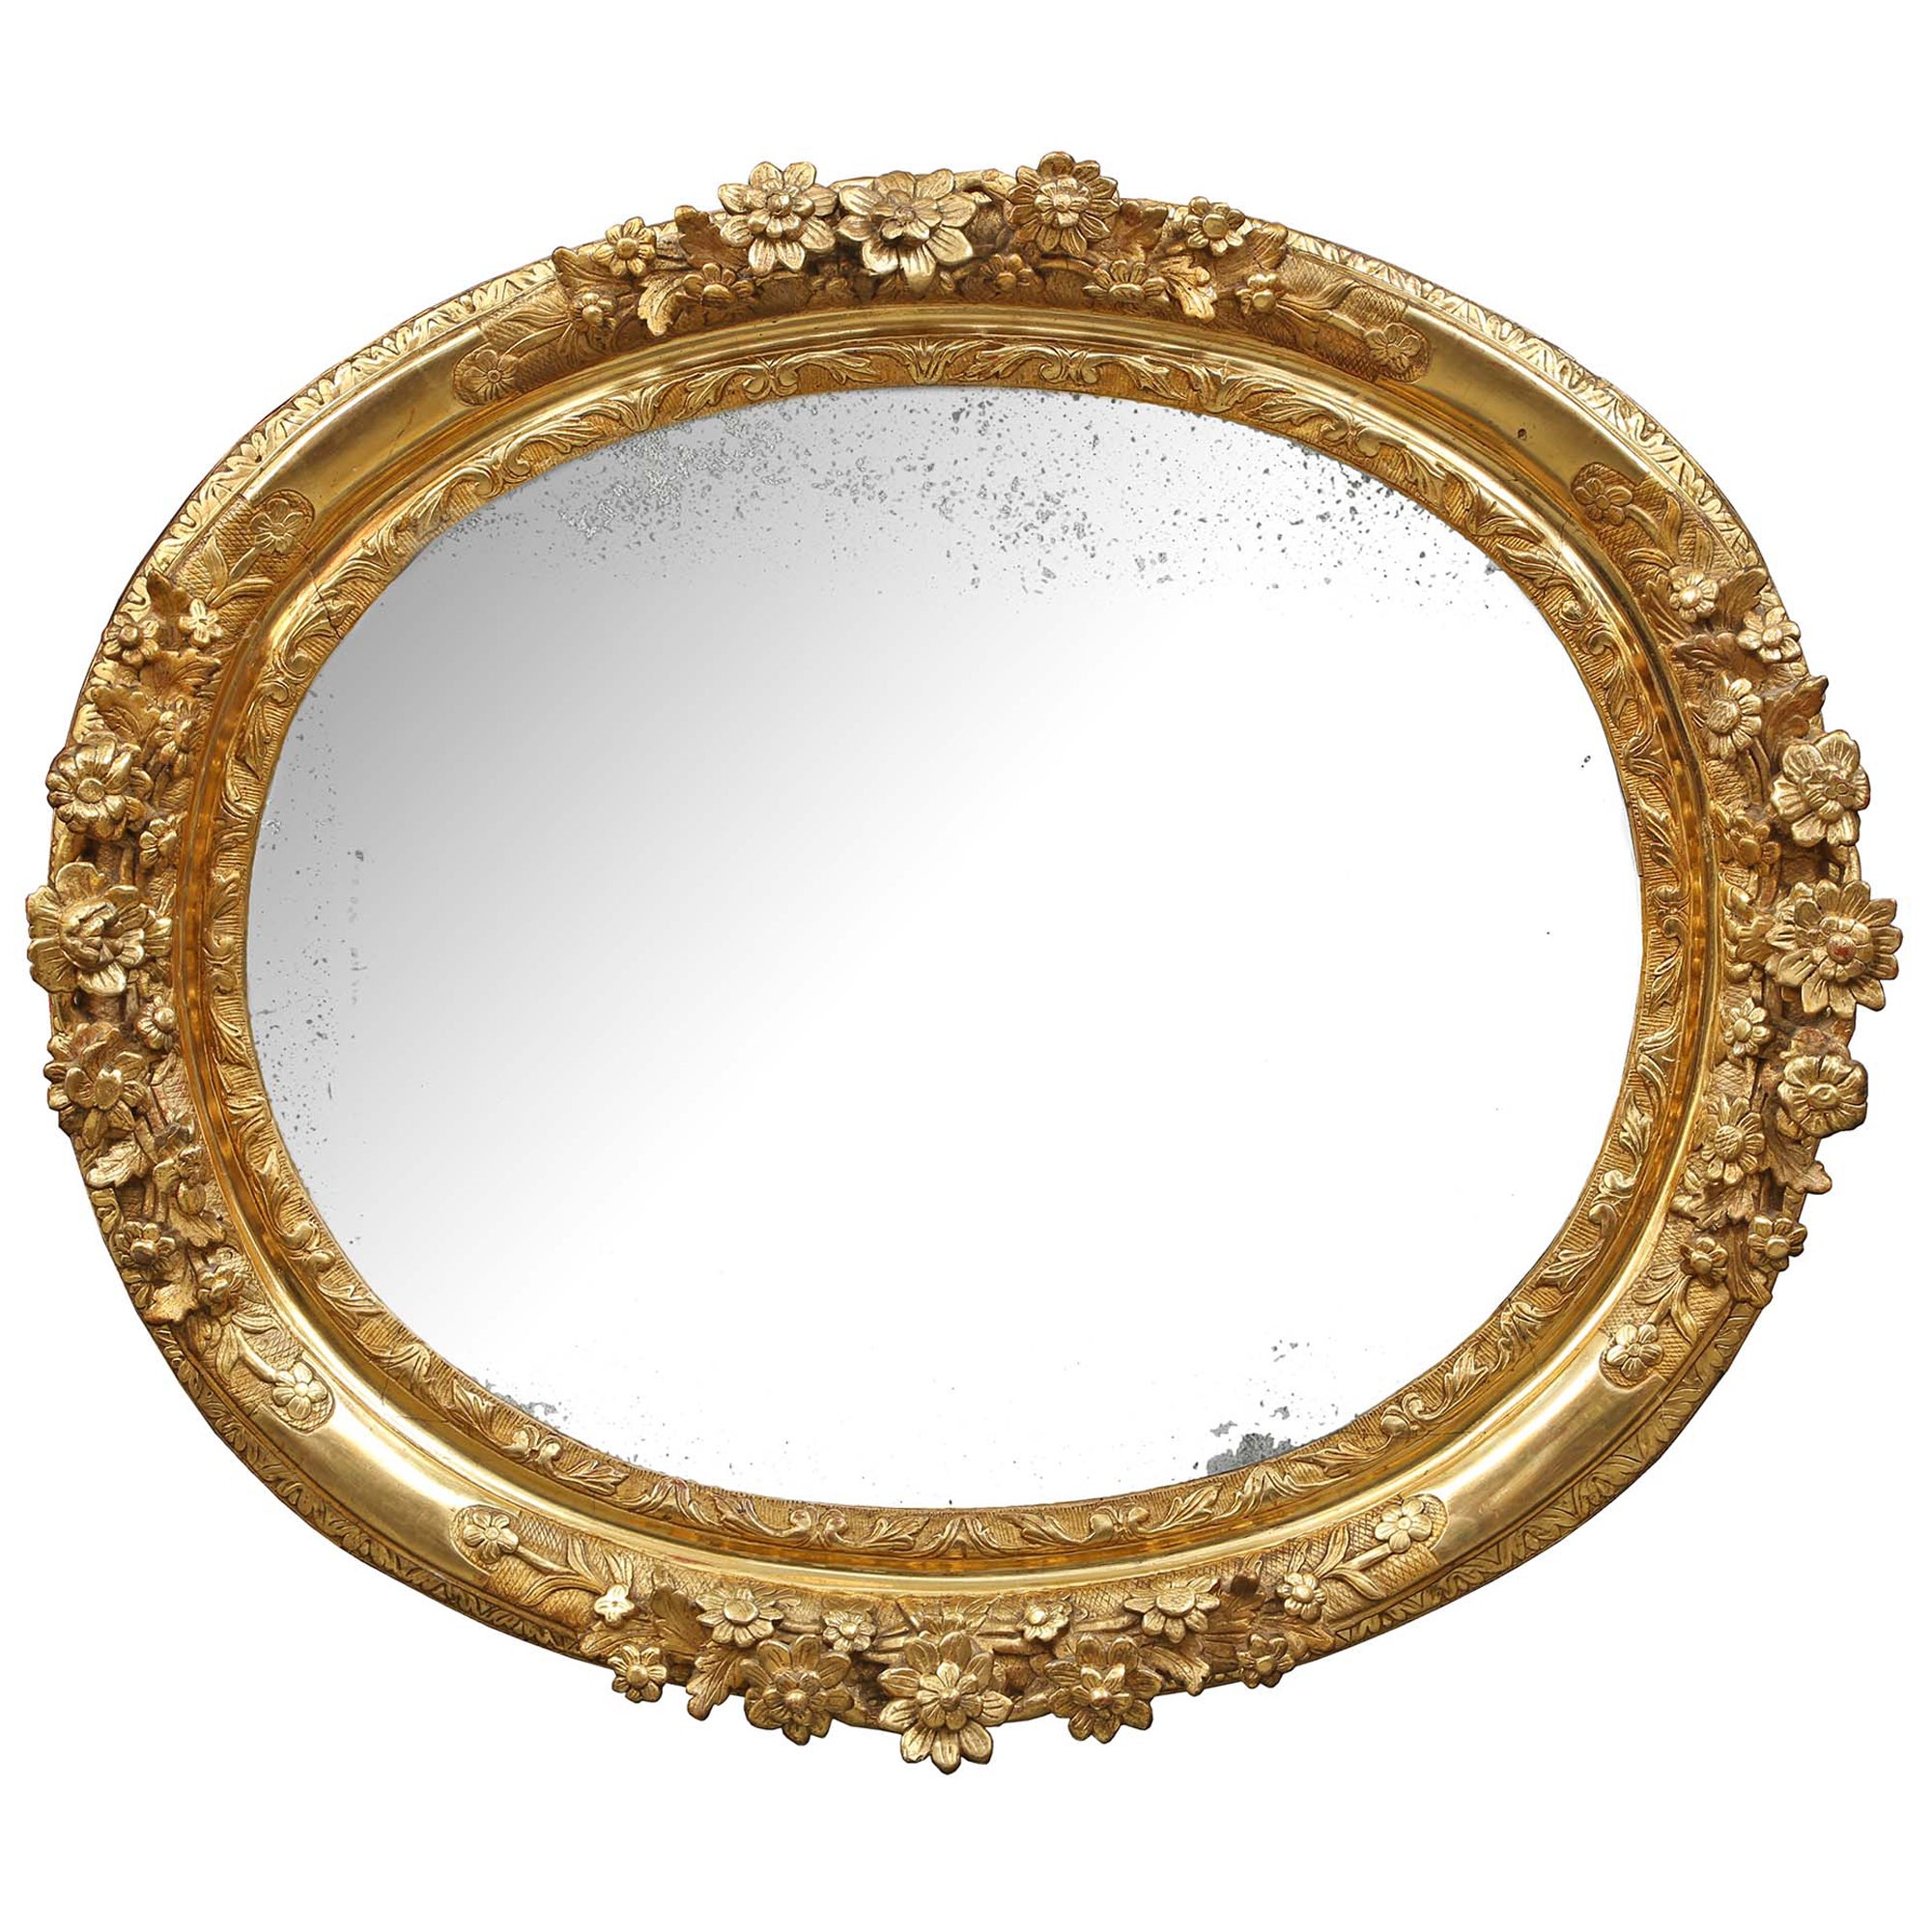 French 18th Century Louis XIV Period Finely Carved Giltwood Mirror